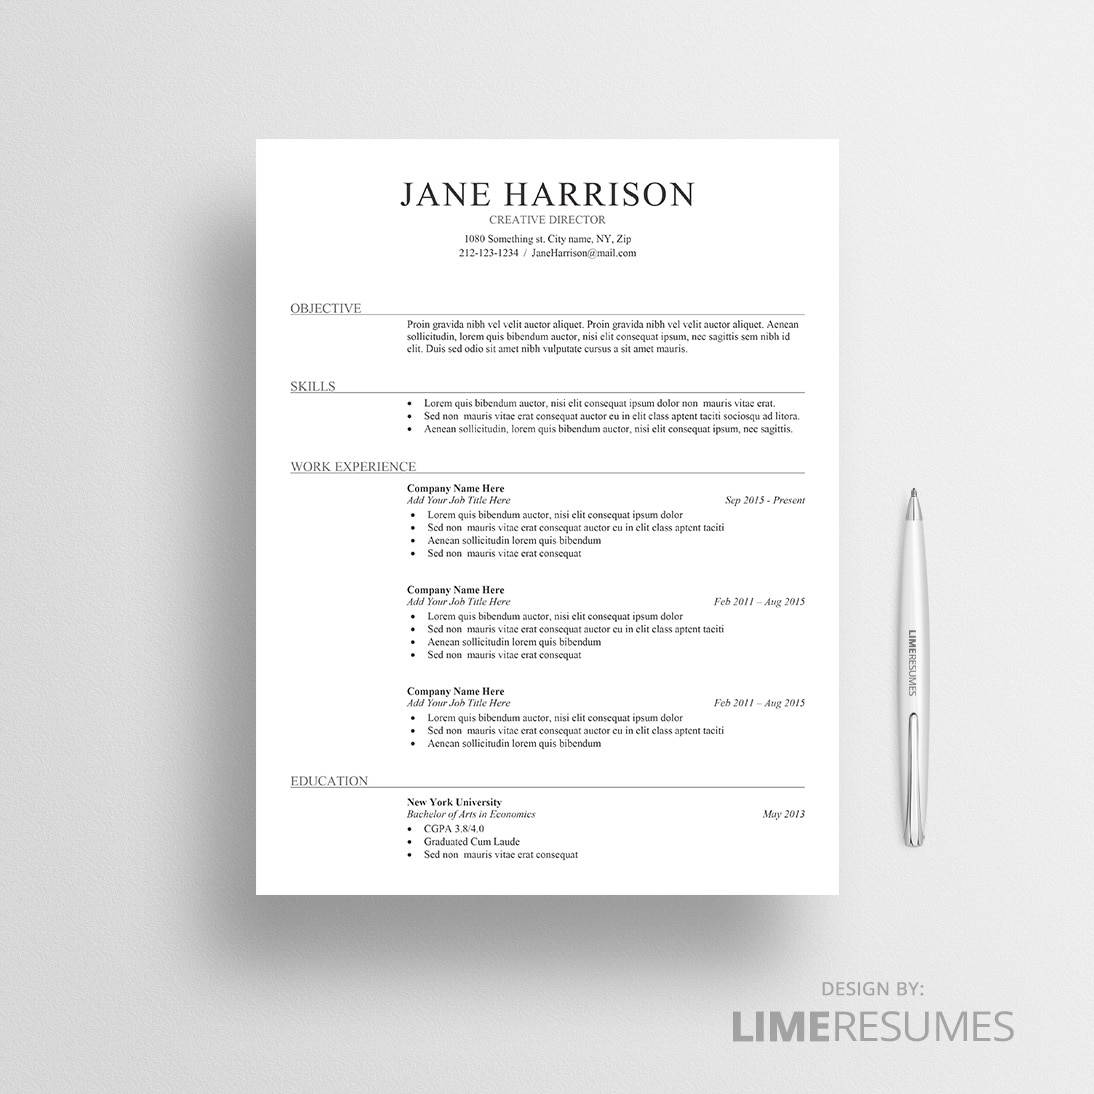 Resume with Photo CV Template with Photo LimeResumes